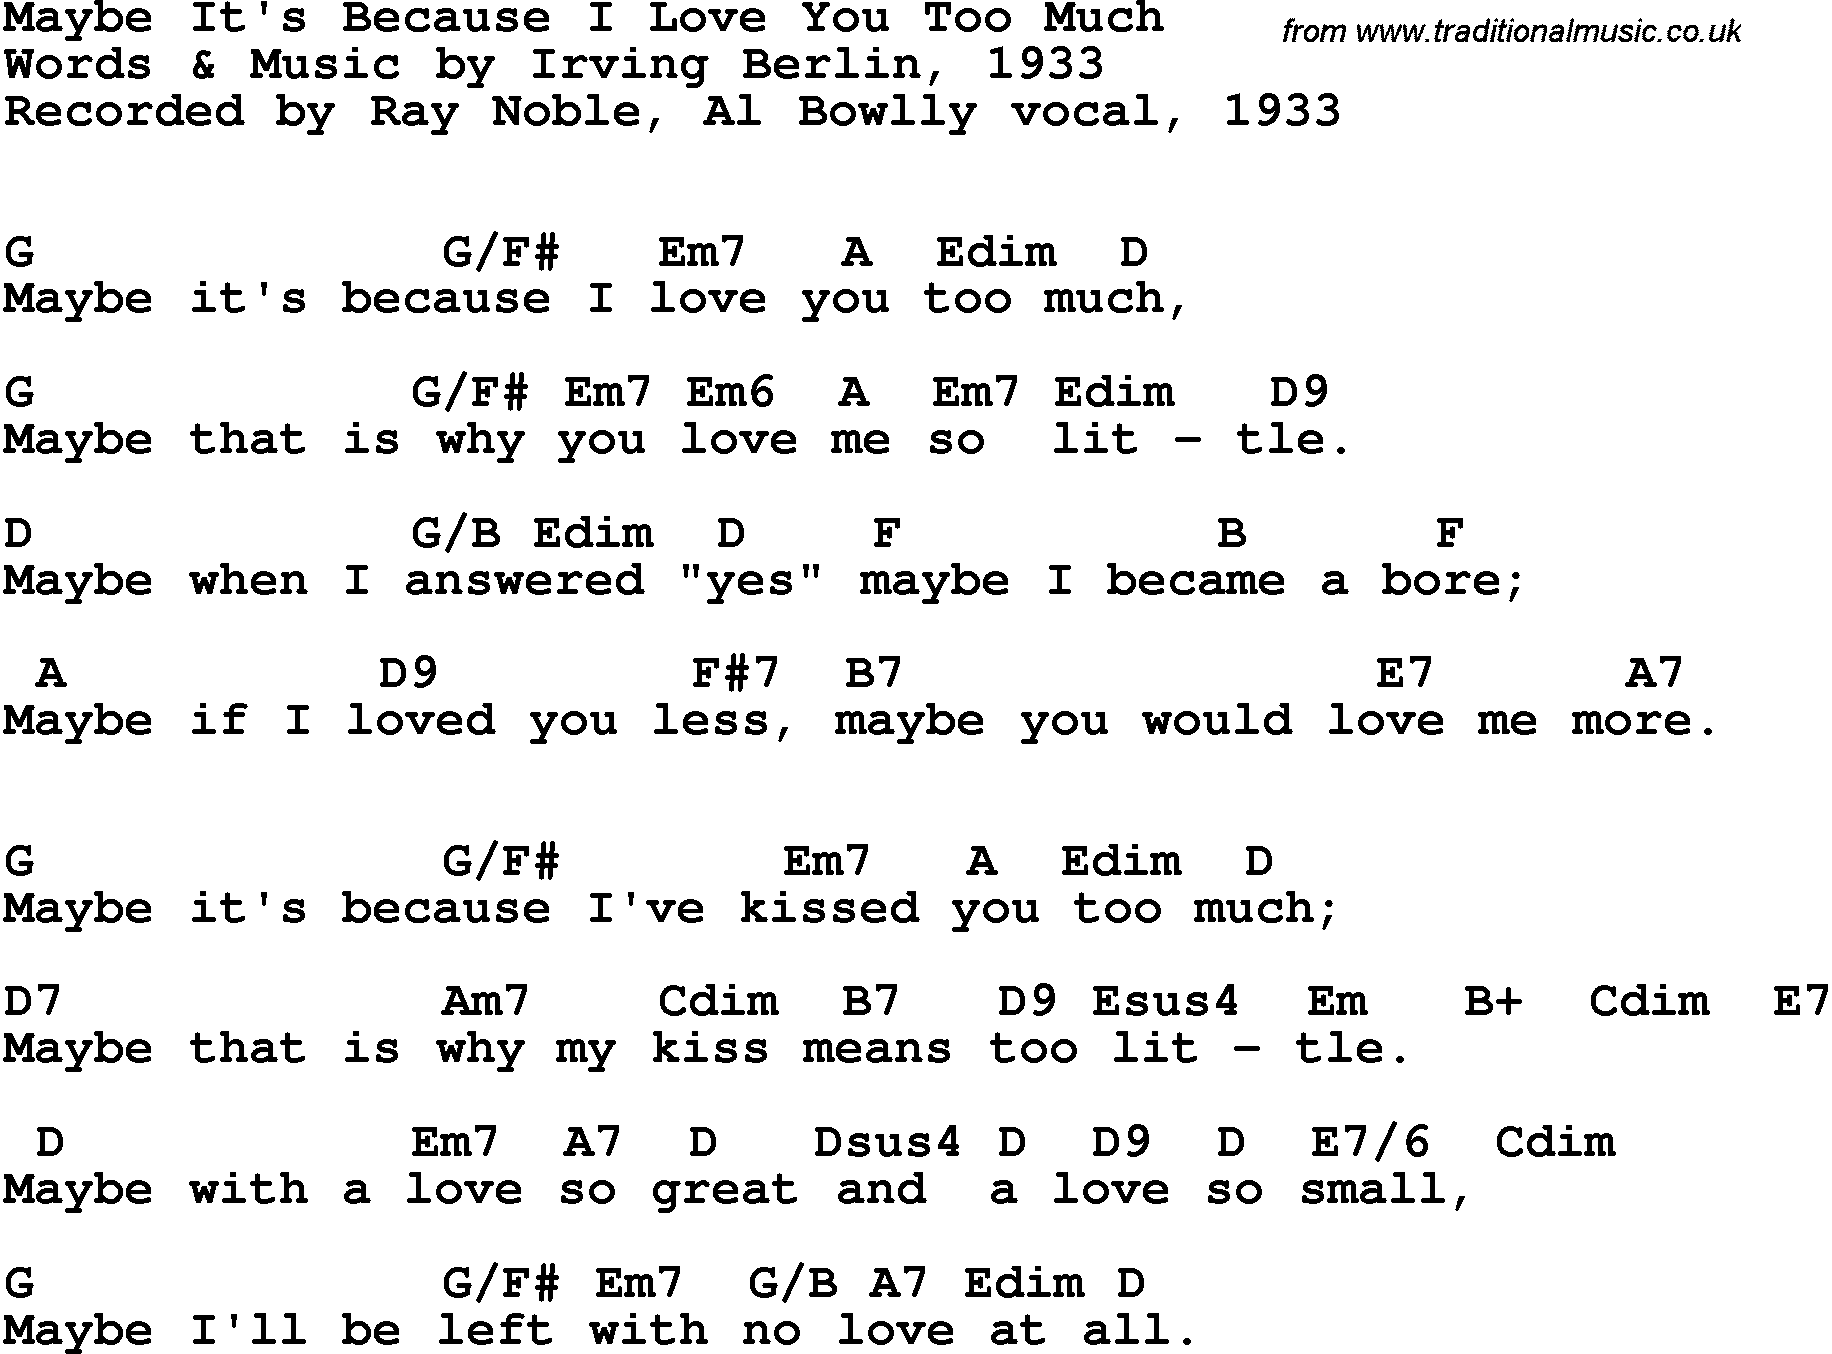 Song Lyrics with guitar chords for Maybe It's Because I Love You Too Much - Ray Noble, Al Bowlly Vocal, 1933